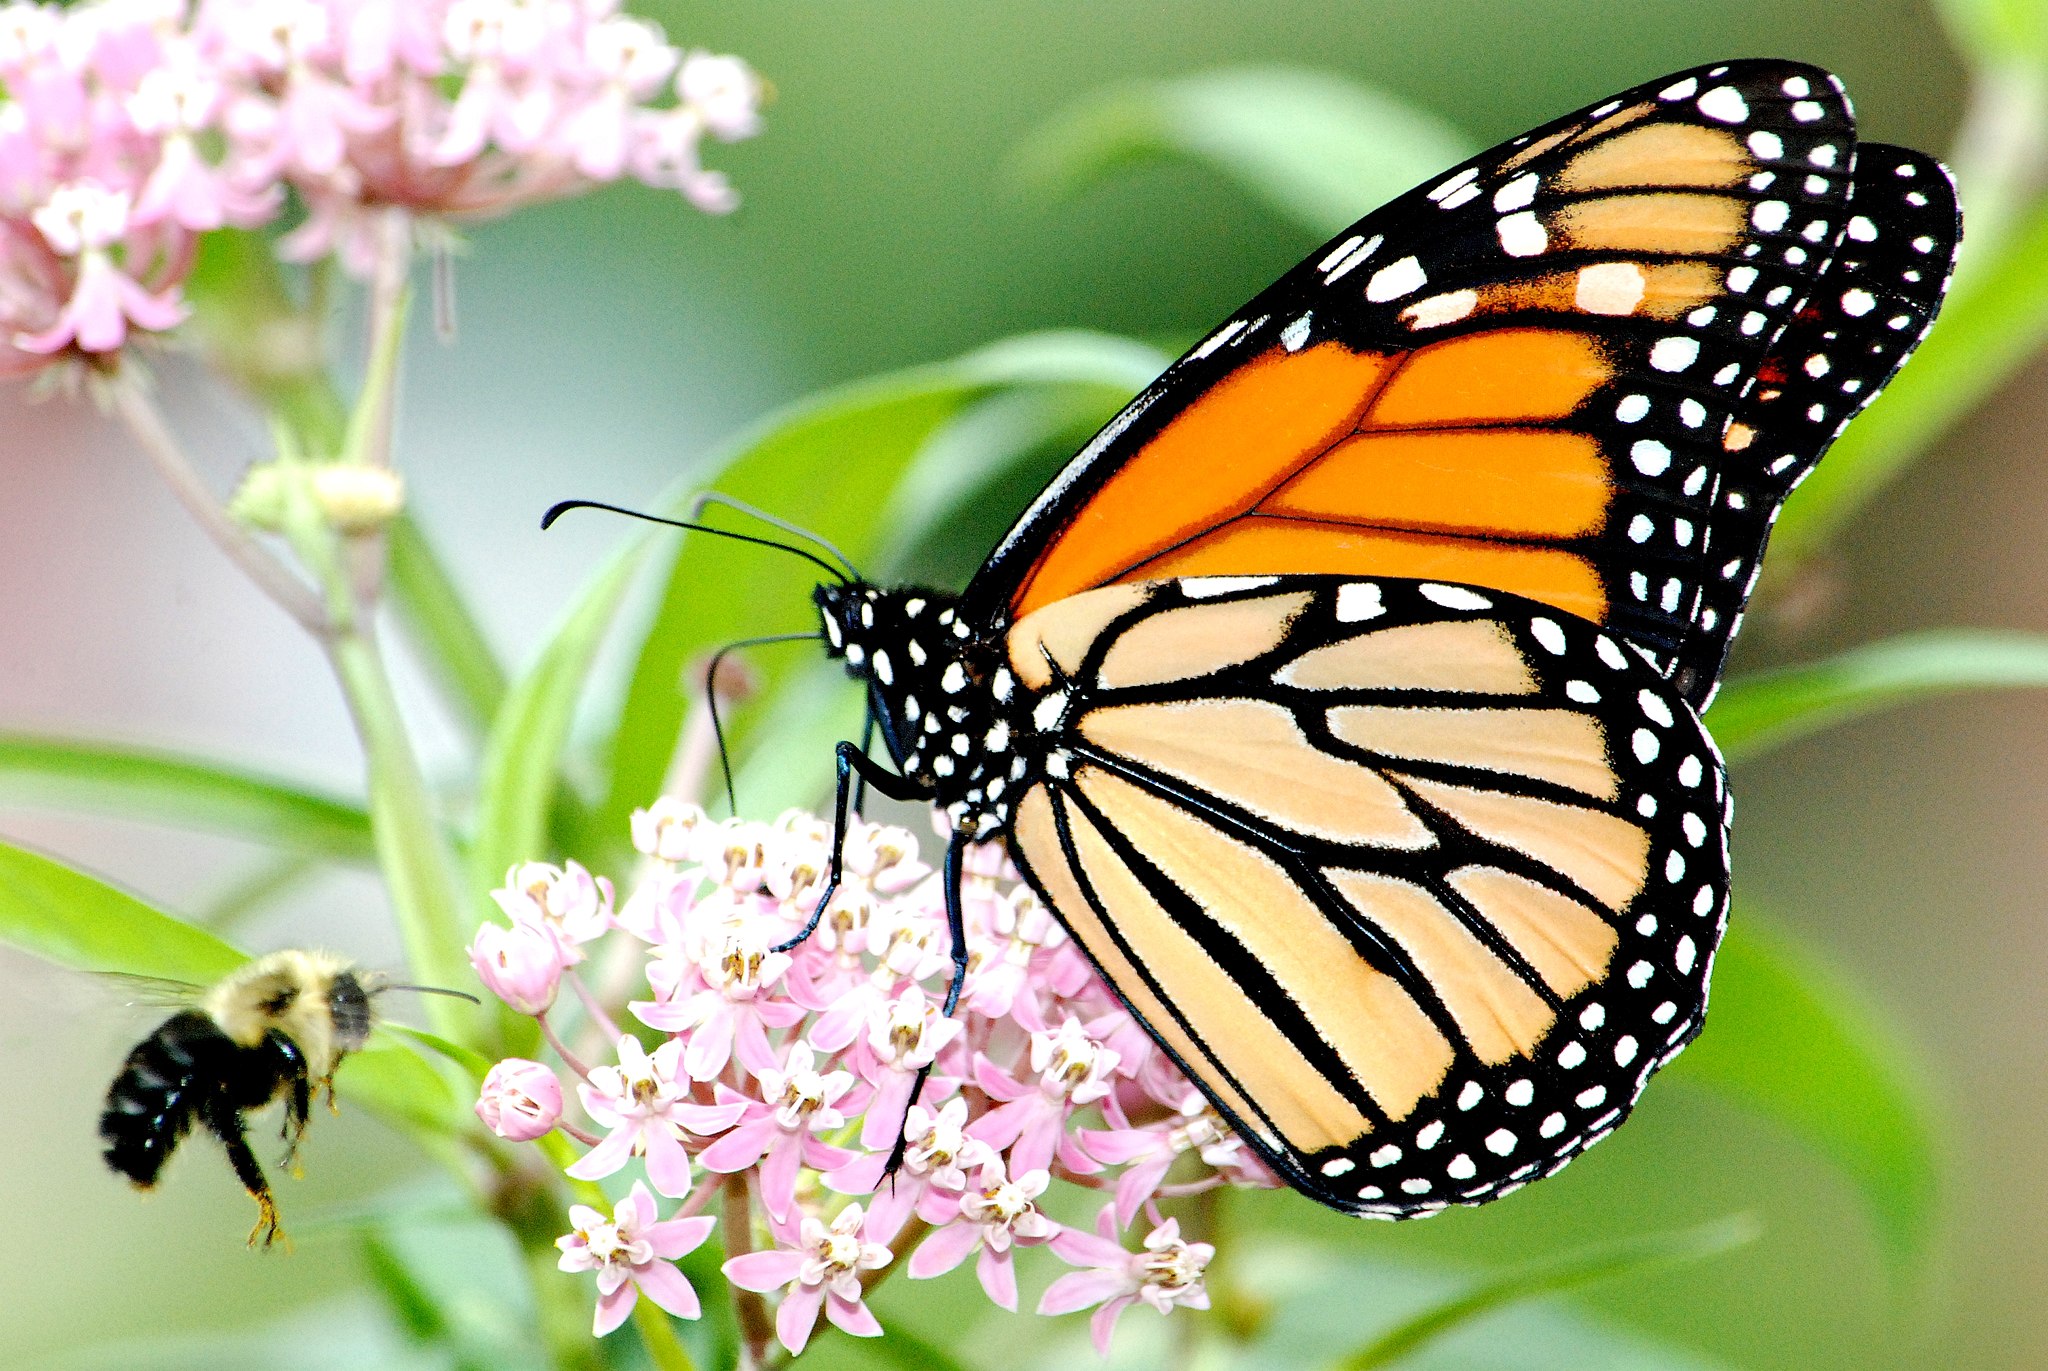 Image shows a monarch butterfly feeding from milkweed blossoms.